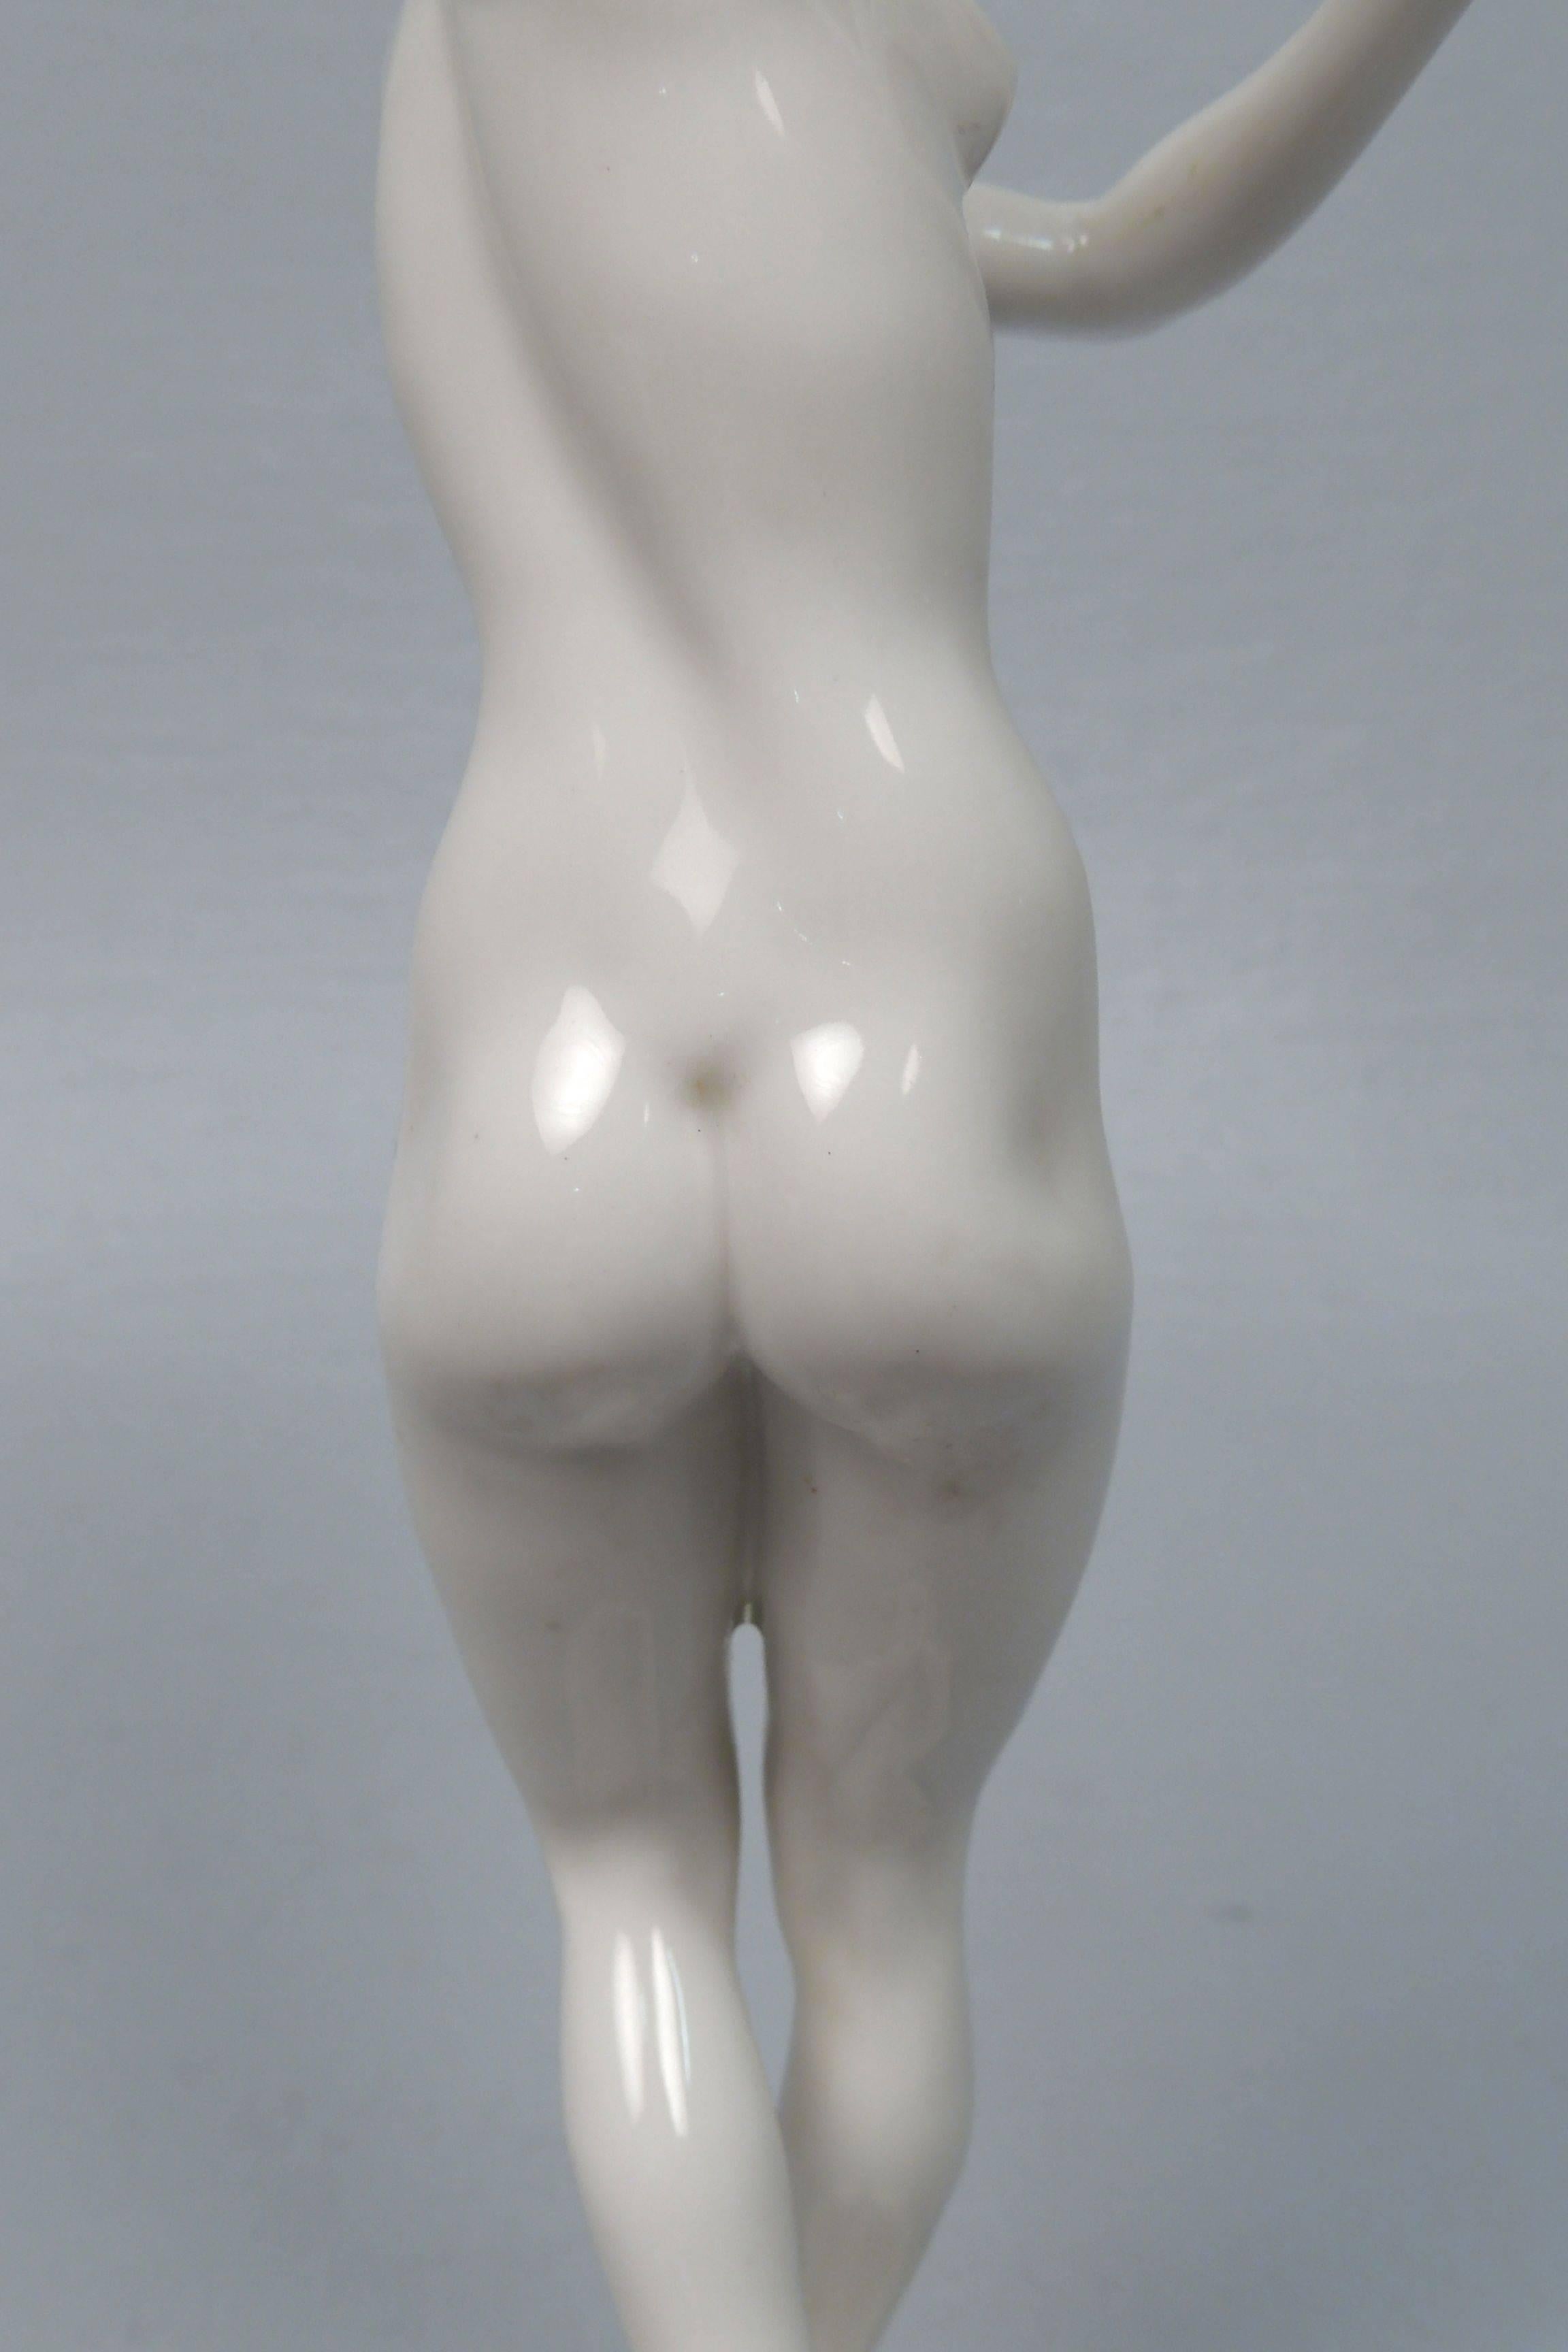 German Art Deco Female Nude Figurine by Carl Werner for Hutschenreuther Porcelain